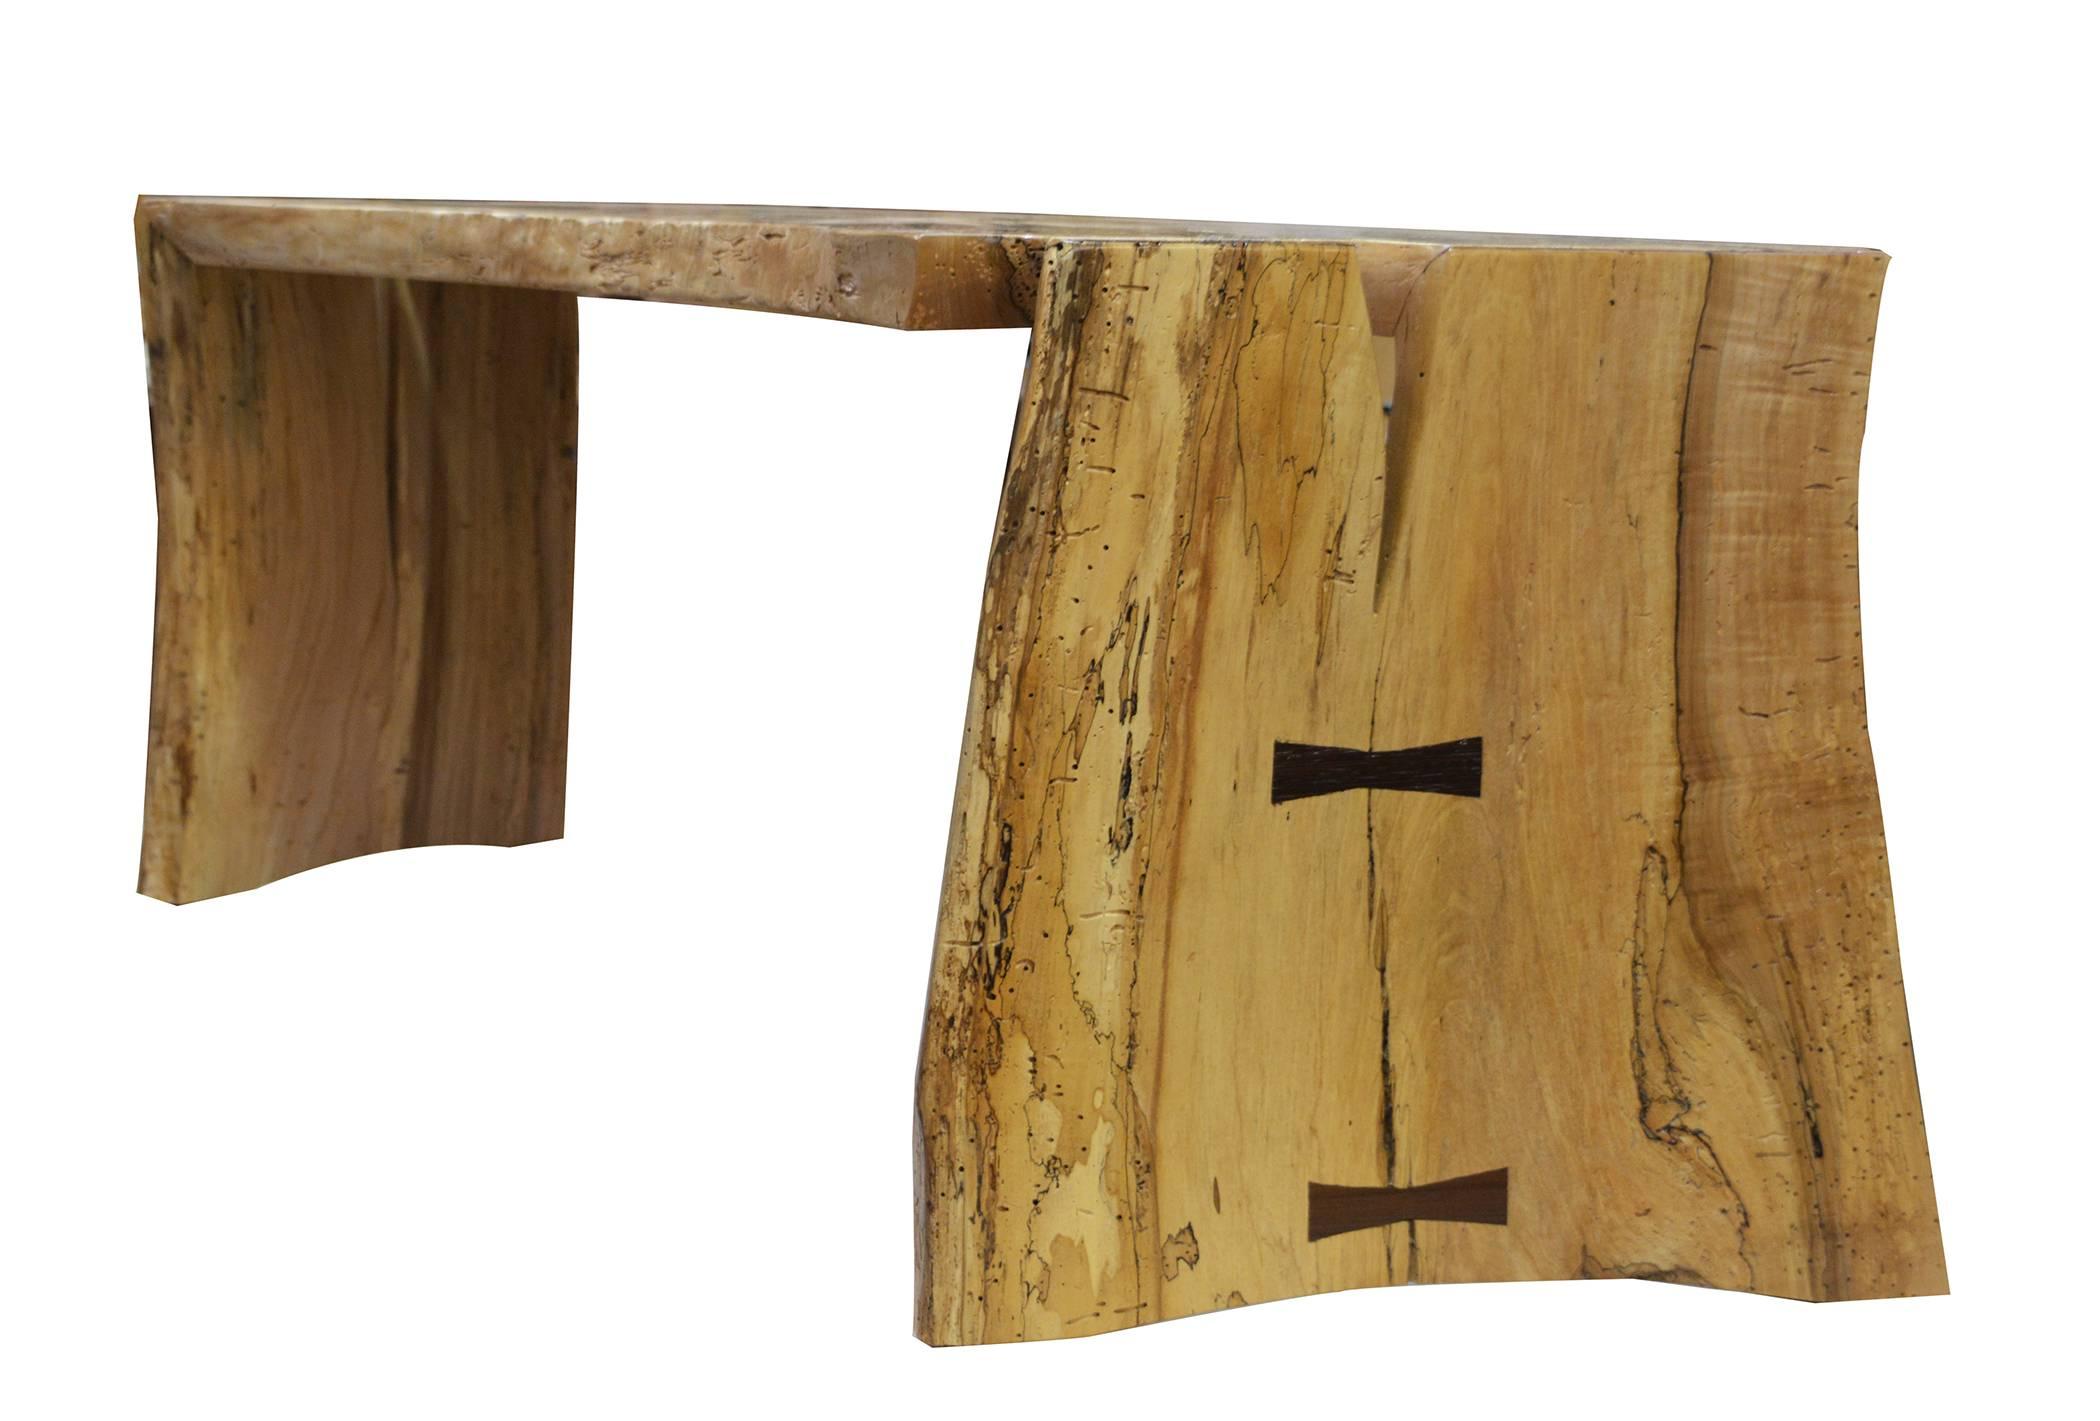 Fine works by David N Ebner the spalted maple free edge bench.
Other woods available on request.